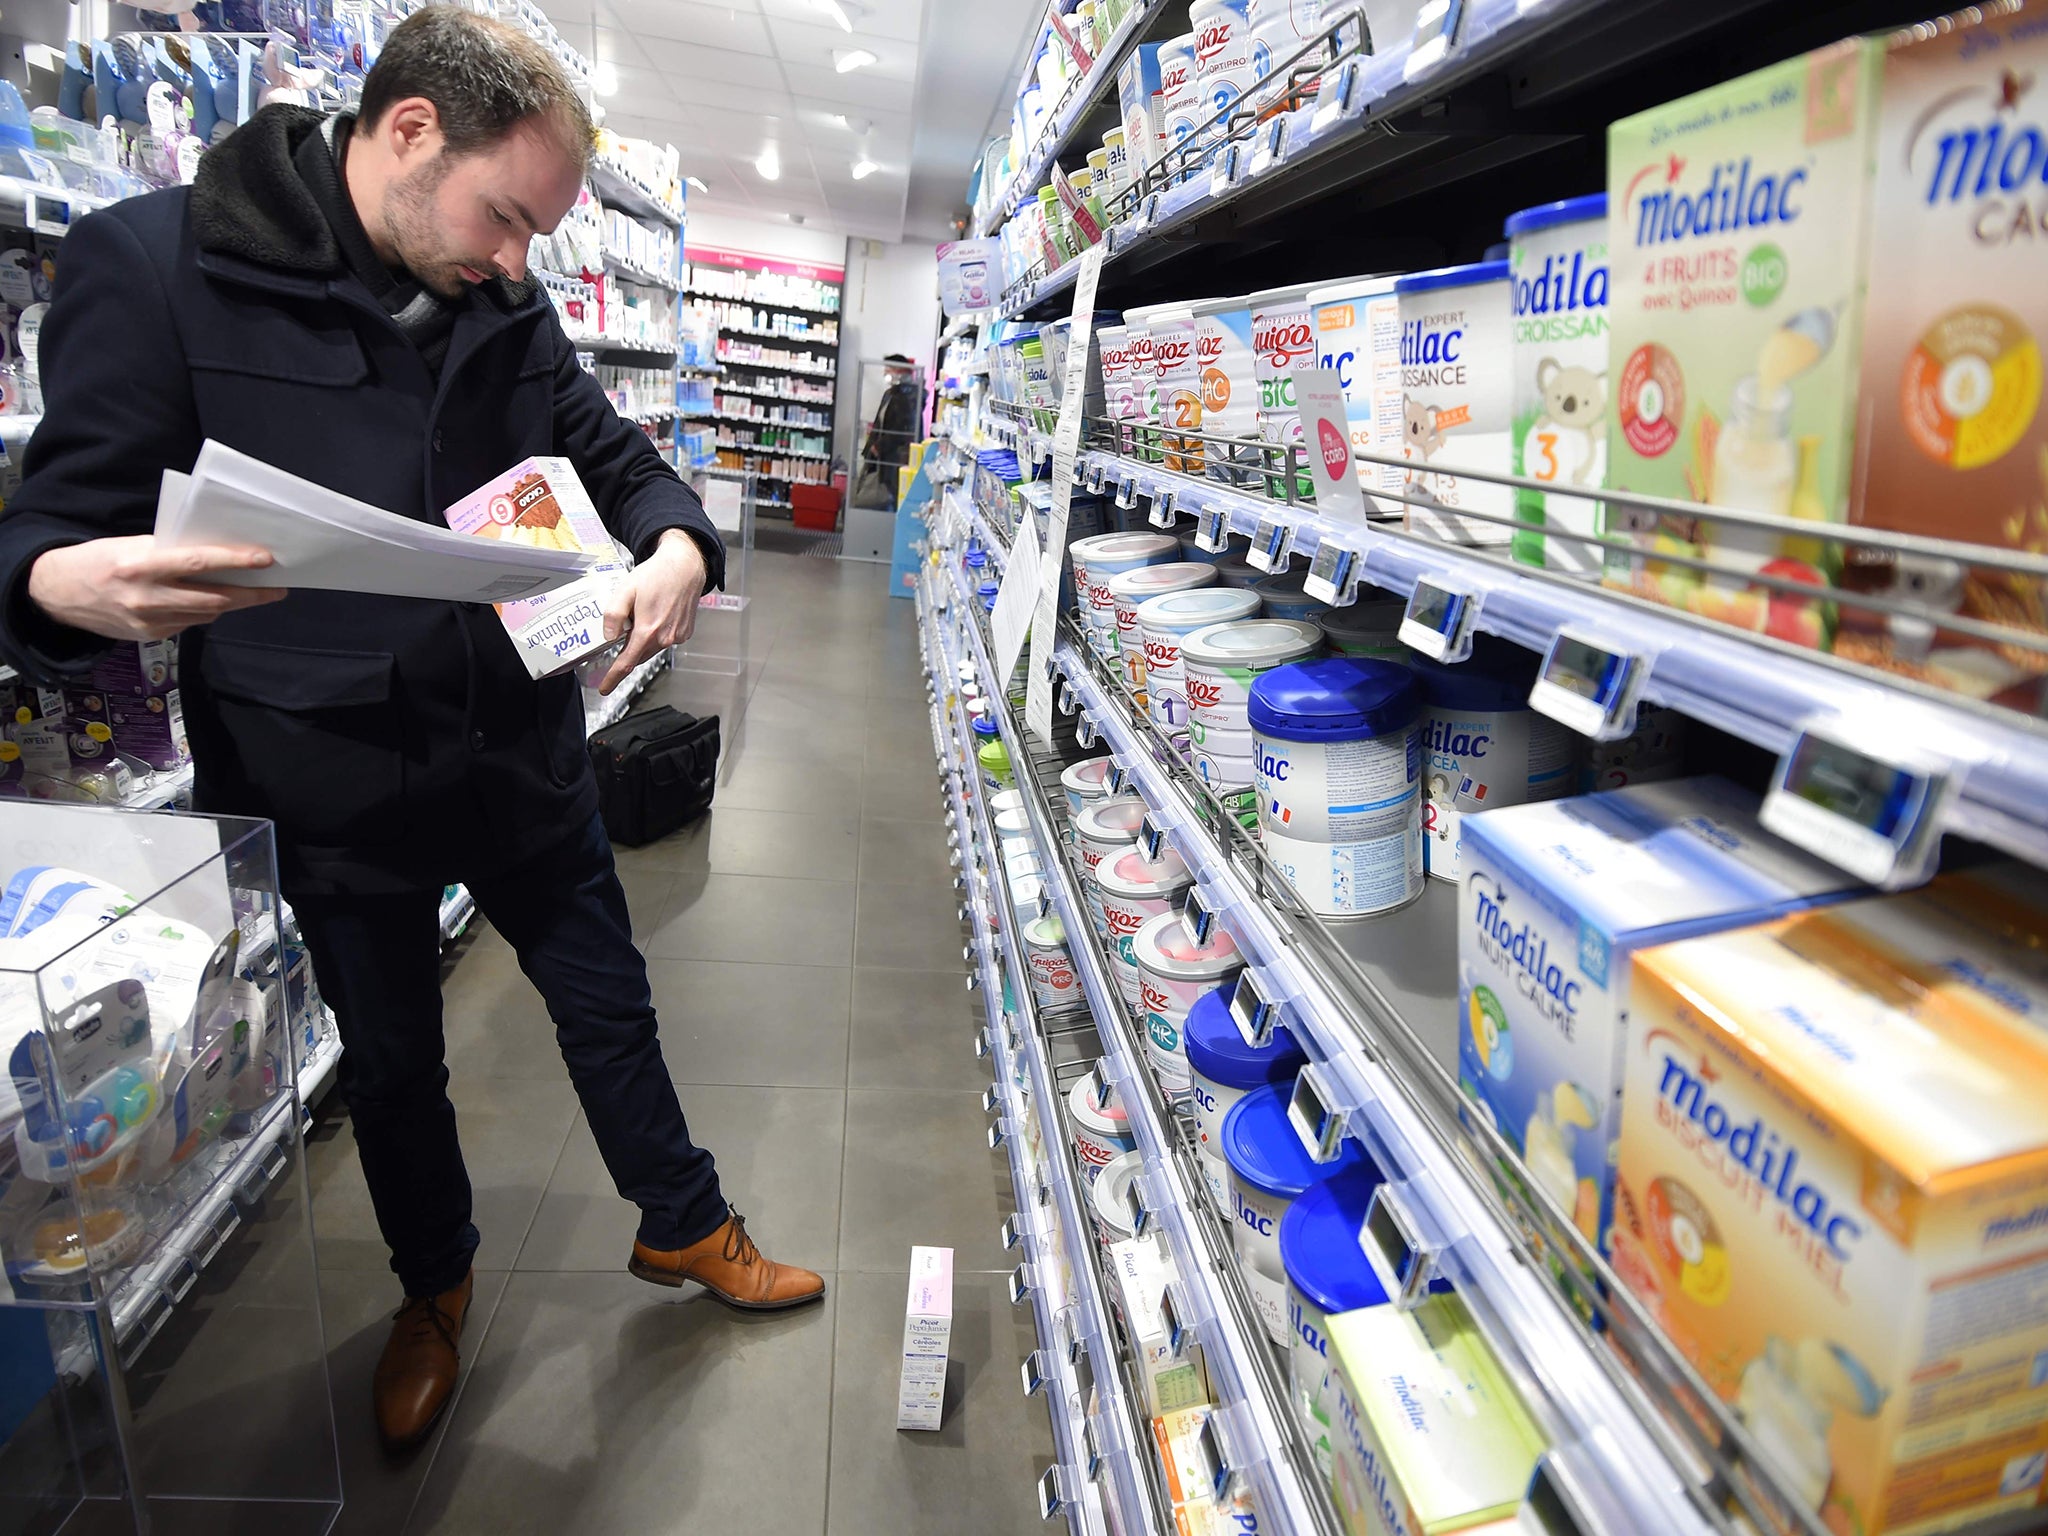 A member of French General Directorate of Competition, Policy Consumer Affairs, and Fraud Control (DGCCRF) checks baby milk products in a pharmacy in Orleans. More than 12 million boxes of powdered baby milk distributed by diary company Lactalis have now been recalled in a salmonella scandal.